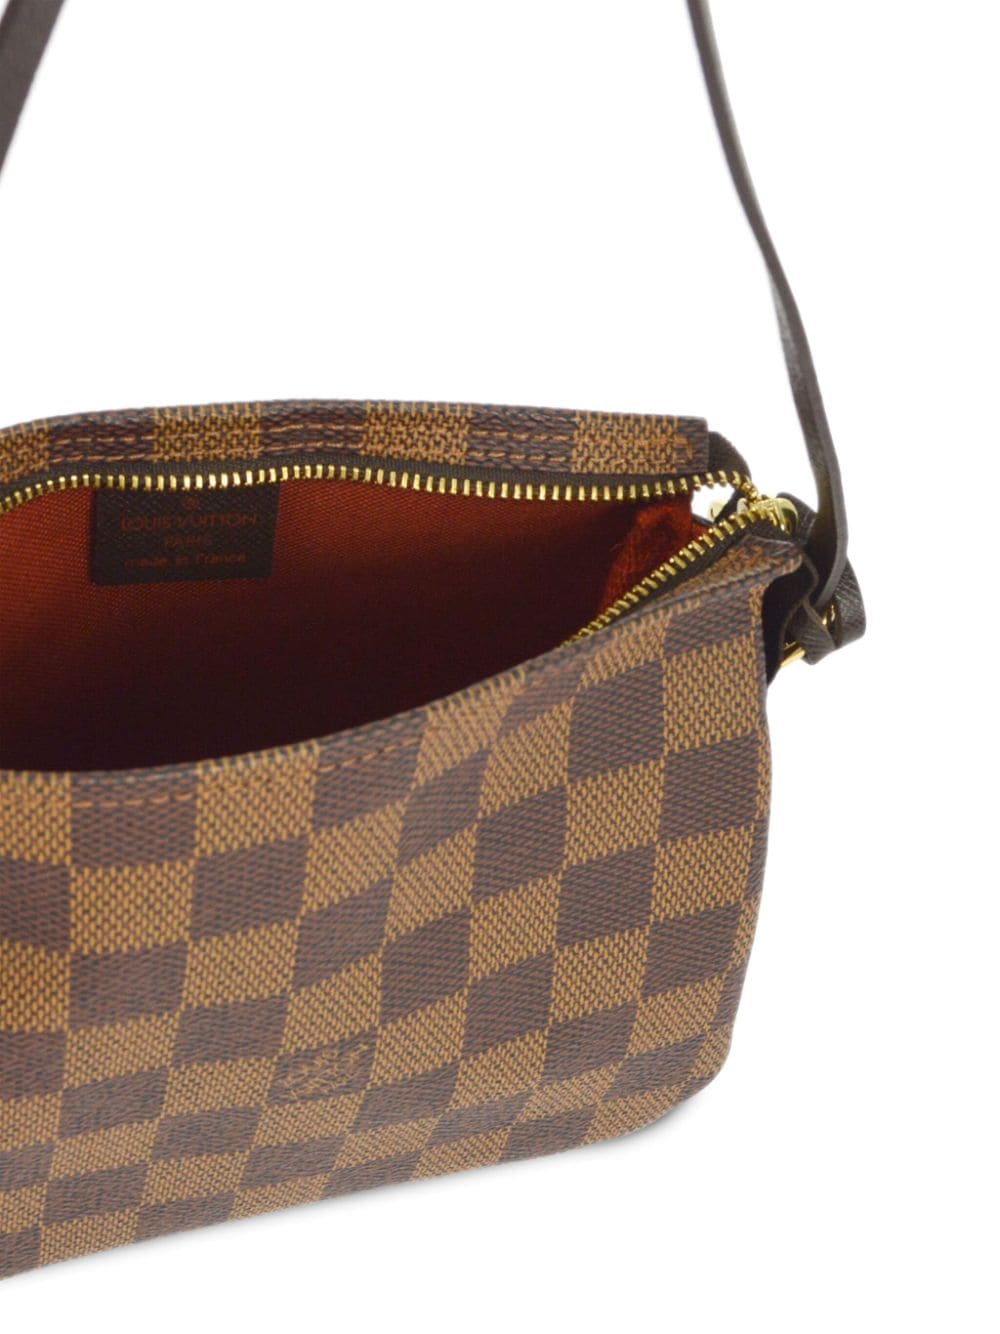 Louis Vuitton 2002 pre-owned Monogram 15 Cosmetic Pouch - Farfetch